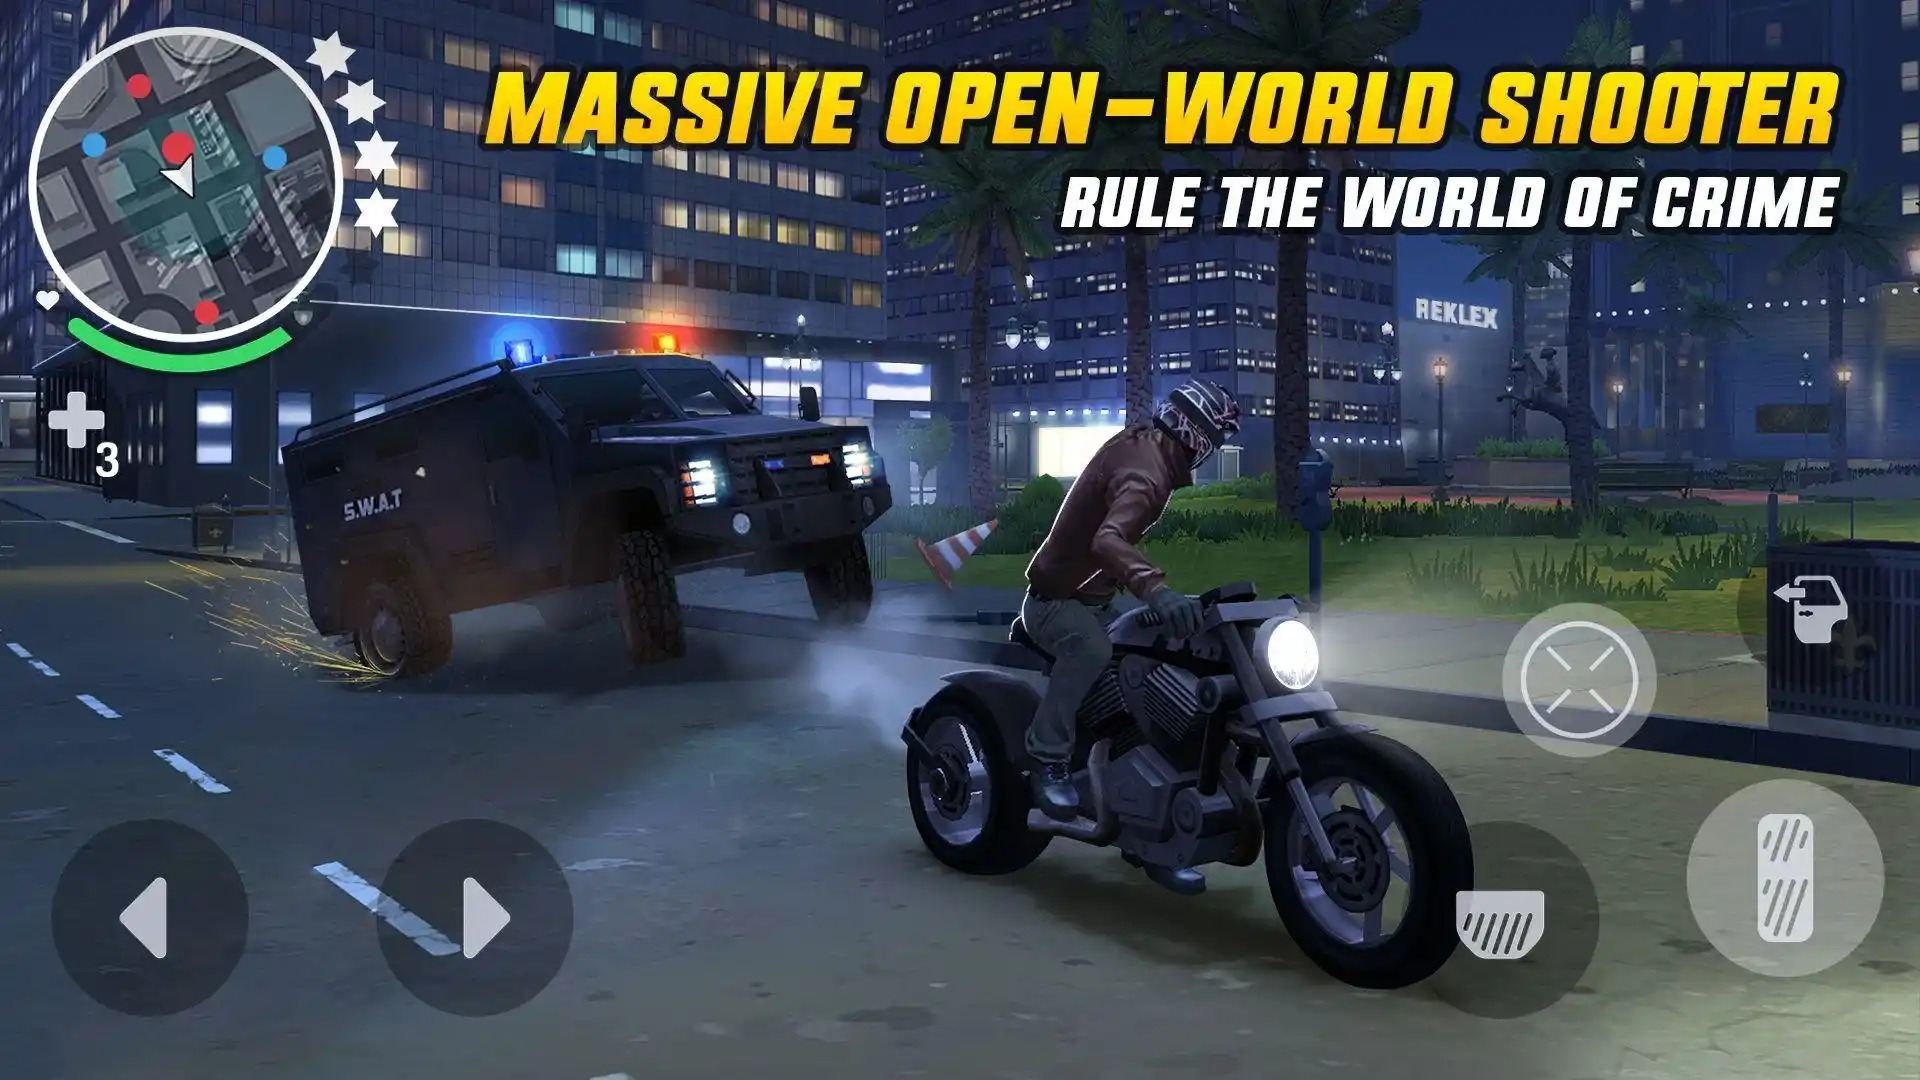 Top 10 Open World Games for Android in 2024